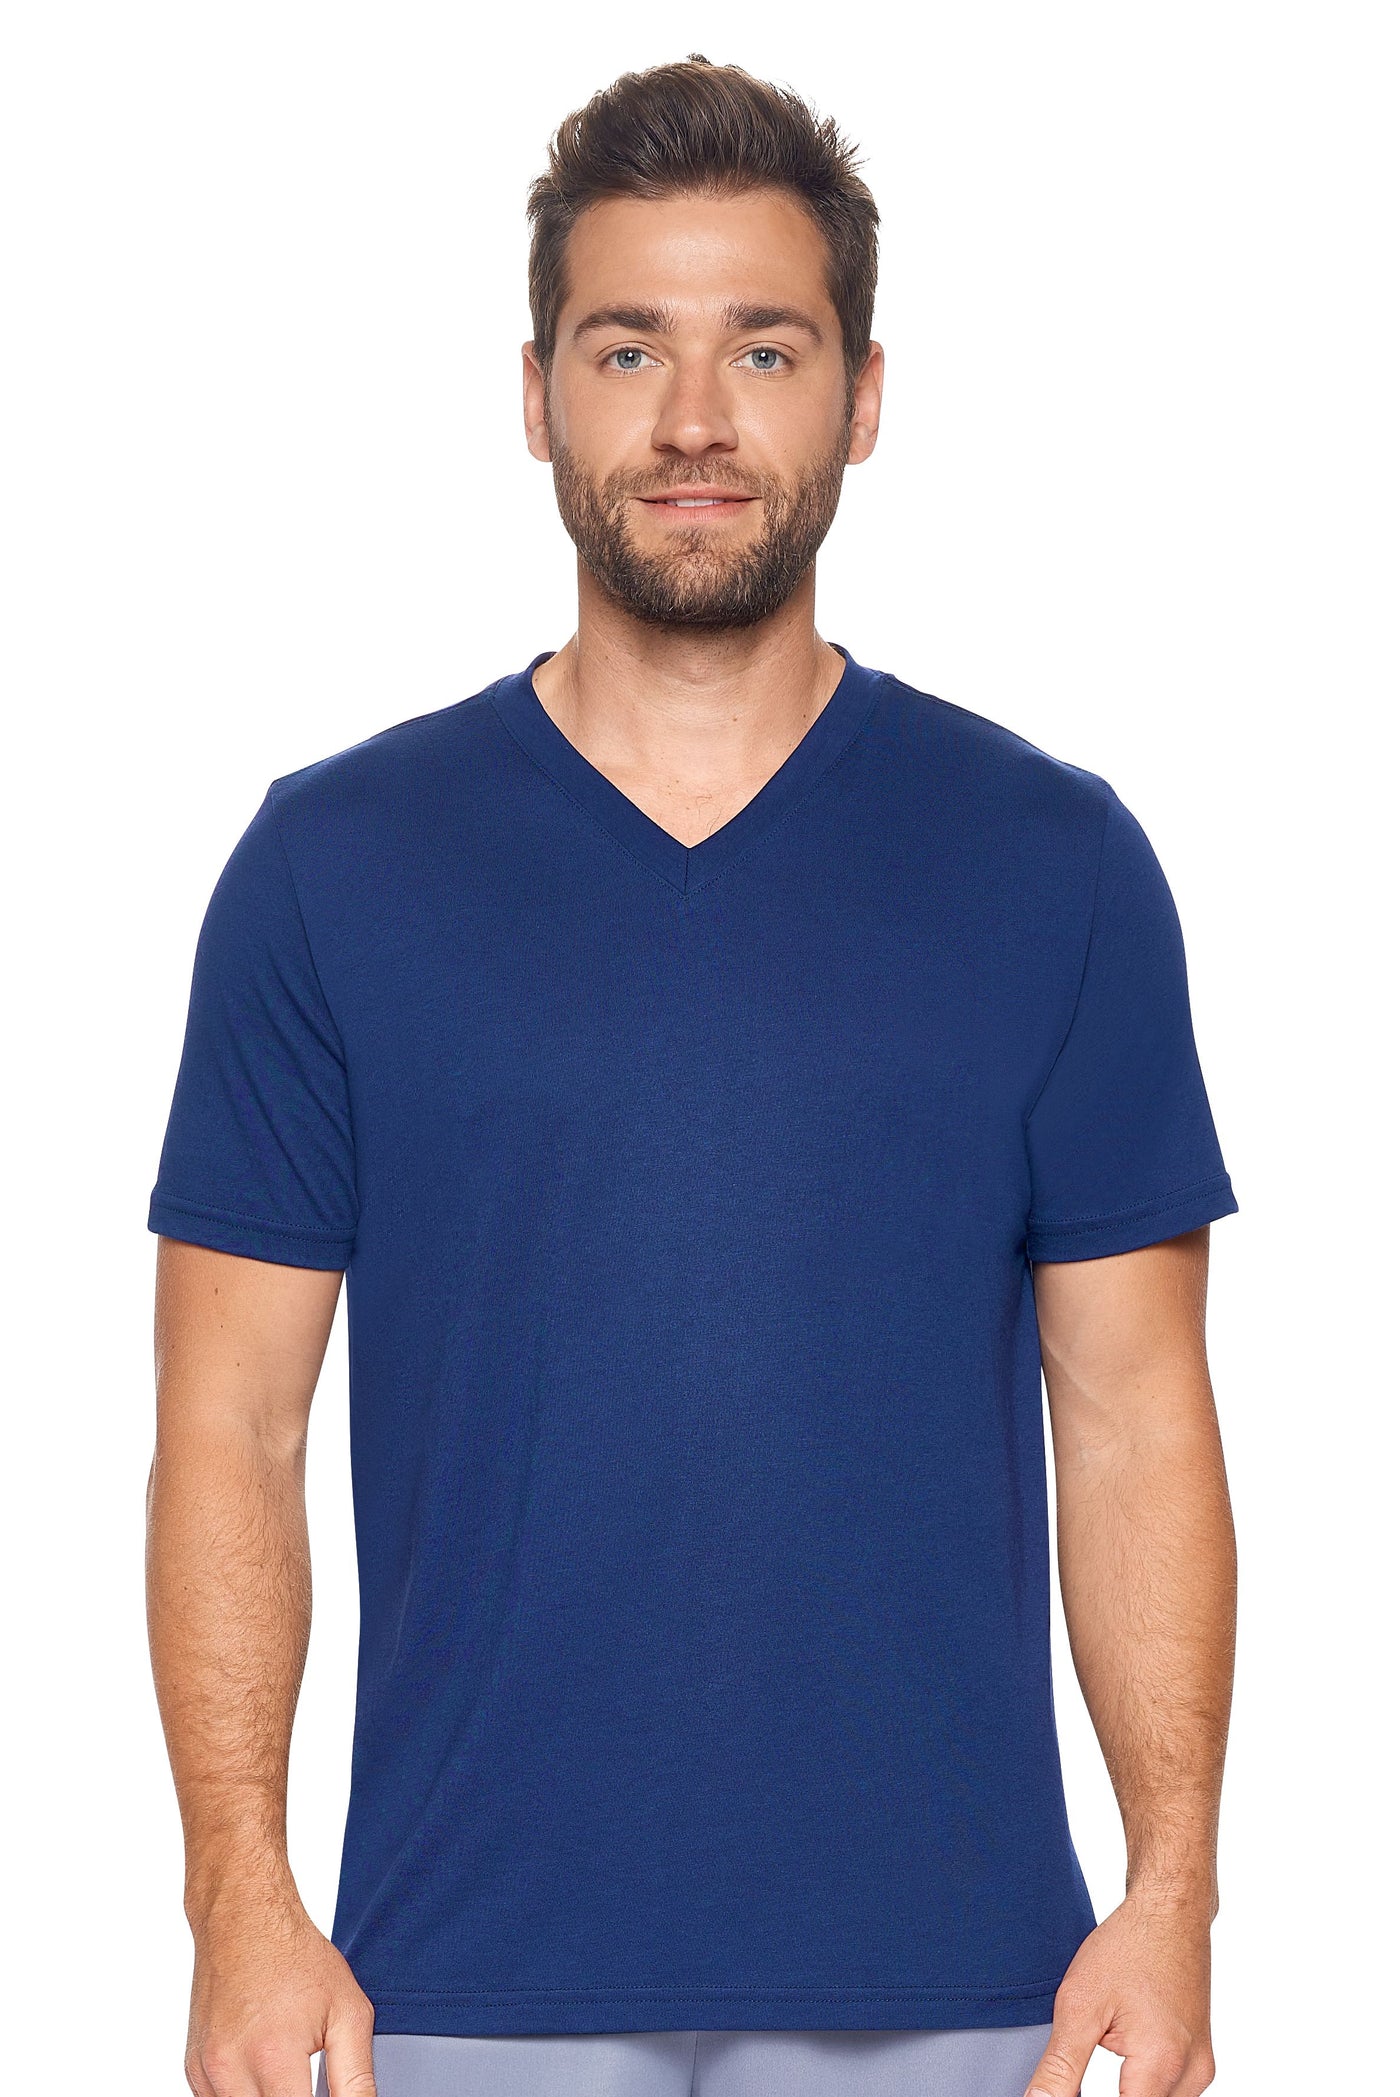 Expert Brand Retail Sustainable Eco-Friendly Apparel Micromodal Cotton Men's V-neck T-Shirt Made in USA navy#color_navy